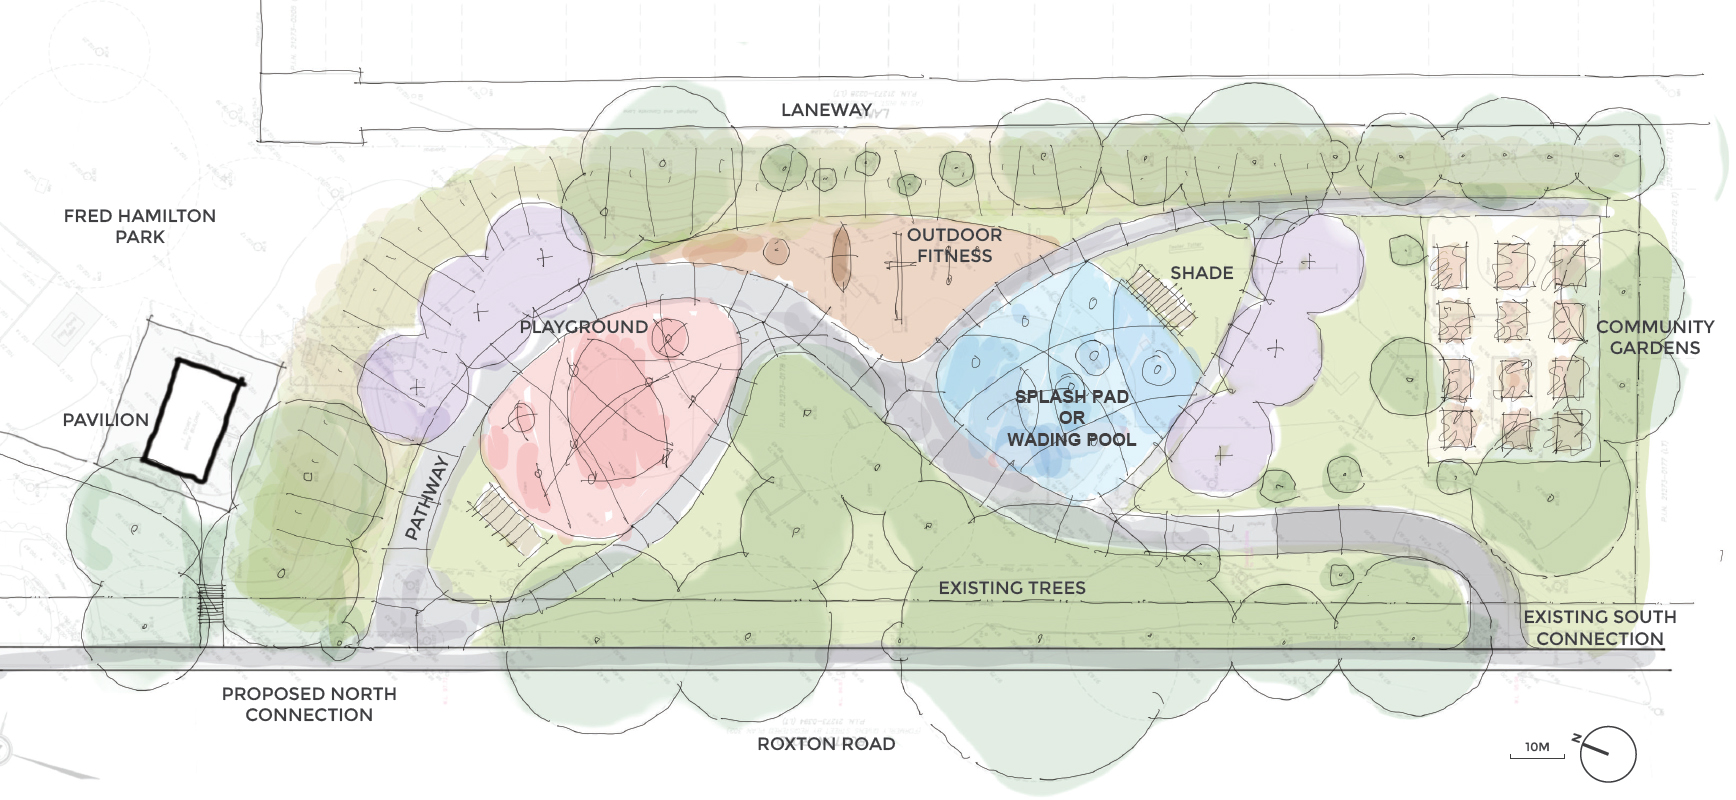 A sketch-style concept plan for the playground and wading pool enhancements. The layout is defined by curved pathways that connects the north to the south end of the park. The community garden is isolated near the east edge of the park near the existing south park entrance. The playground is shown in pink, the splash pad is shown in blue, the outdoor fitness area is shown in light brown and the new plantings are shown in purple.